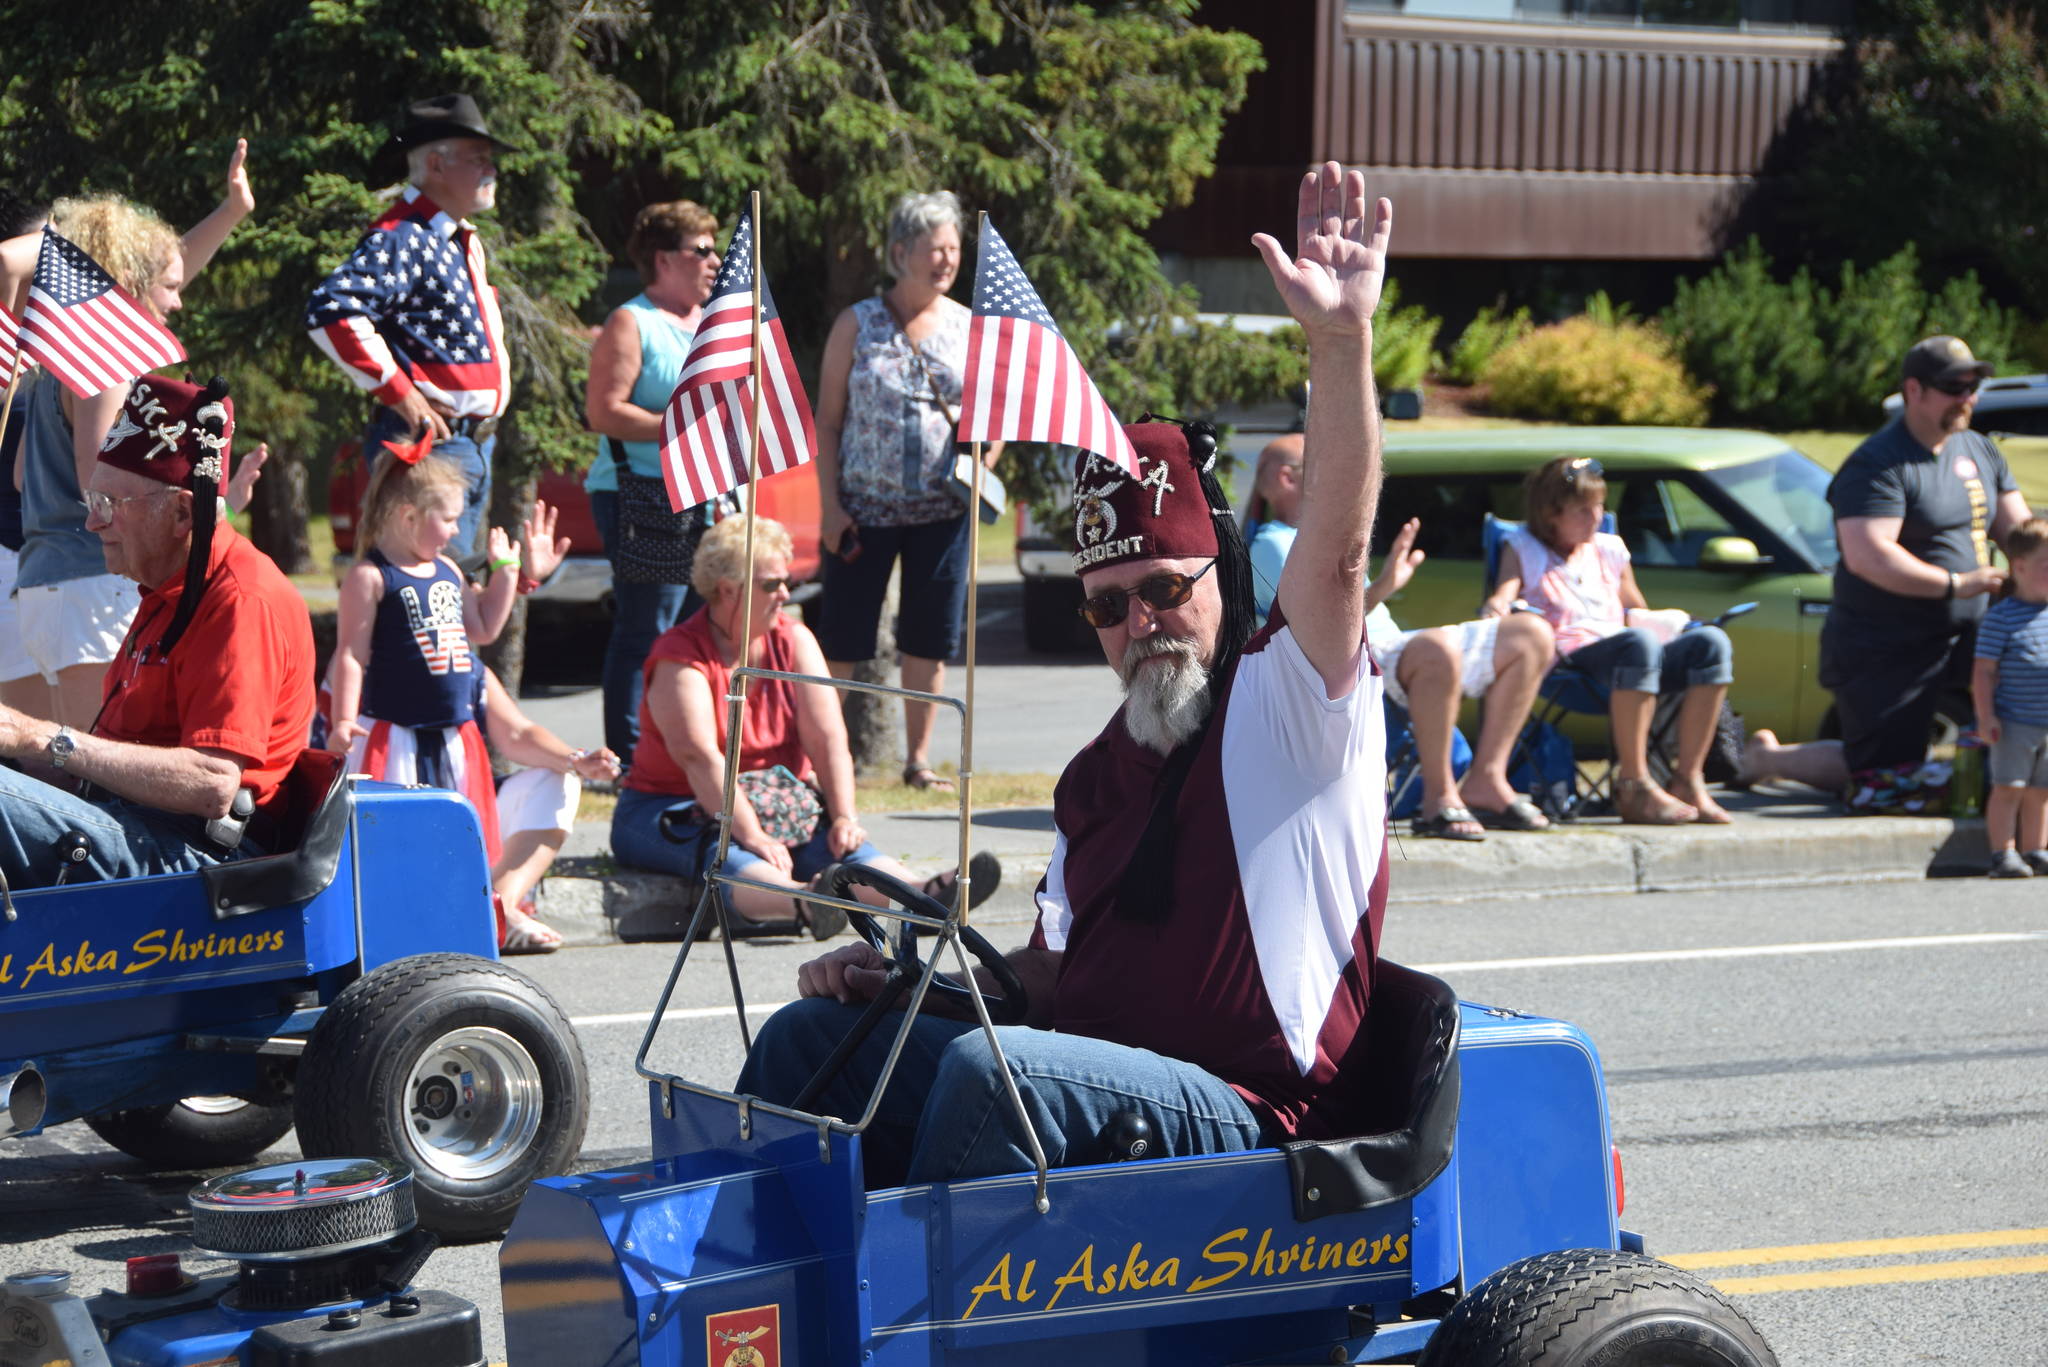 One of the Alaska Shriners waves to the crowd during the 2019 July 4th parade in Kenai, Alaska. (Photo by Brian Mazurek/Peninsula Clarion)